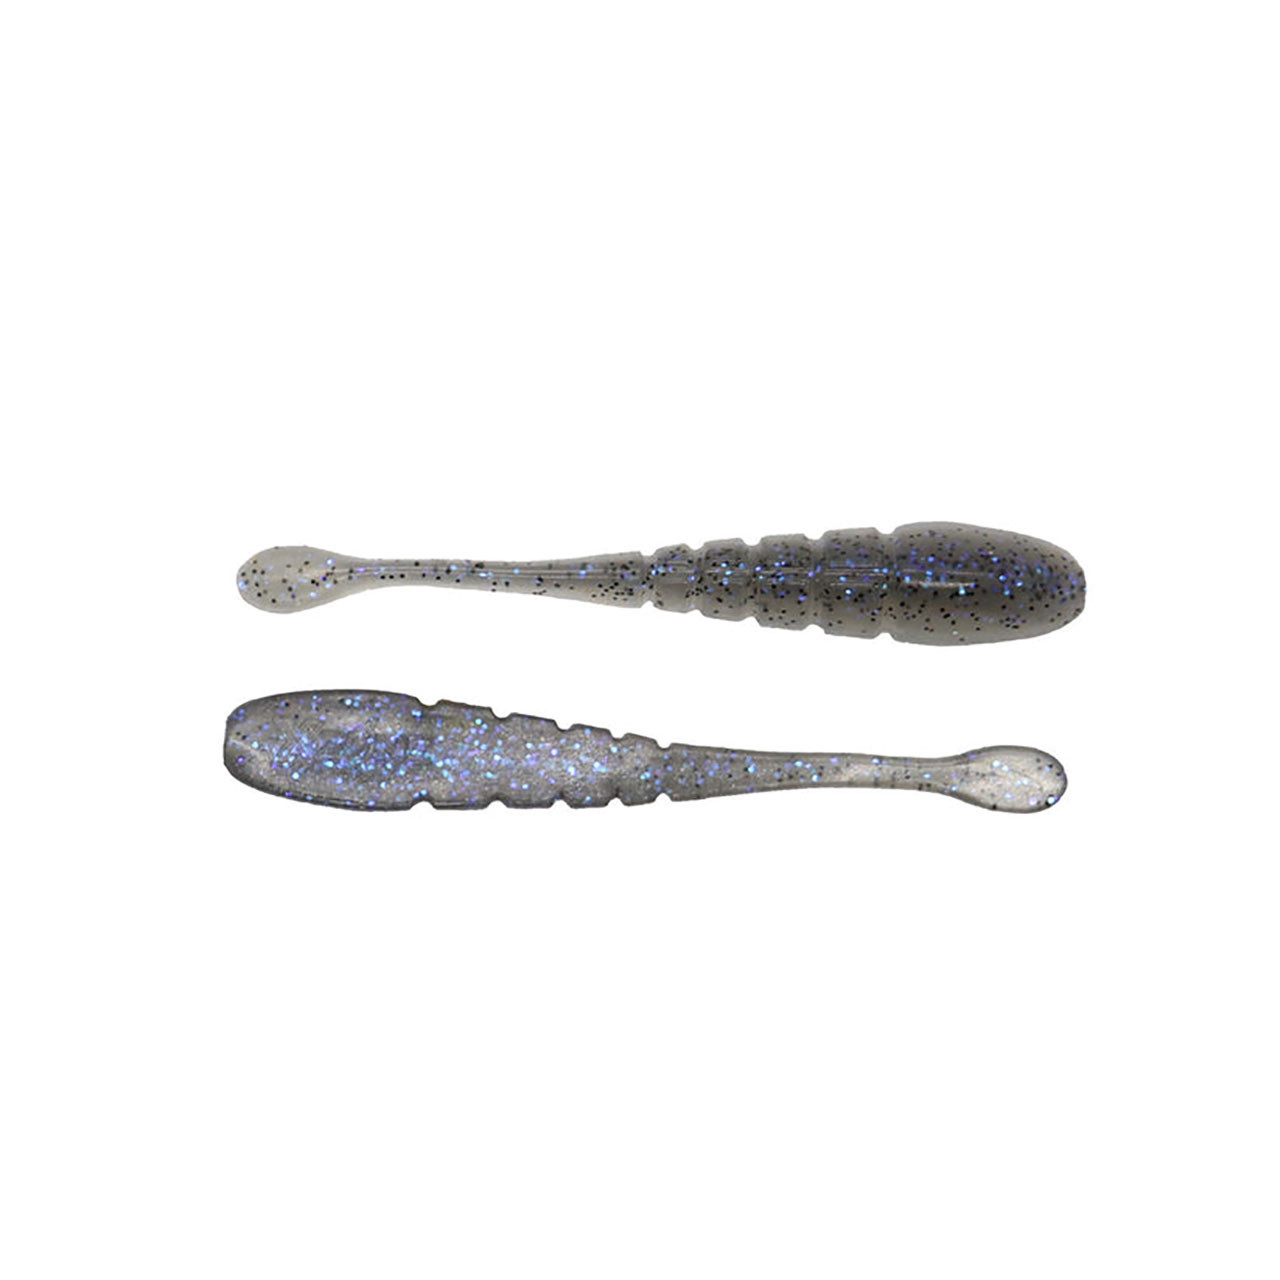 X-Zone Lures 3.25 Pro Series Finesse Slammer Electric Shad